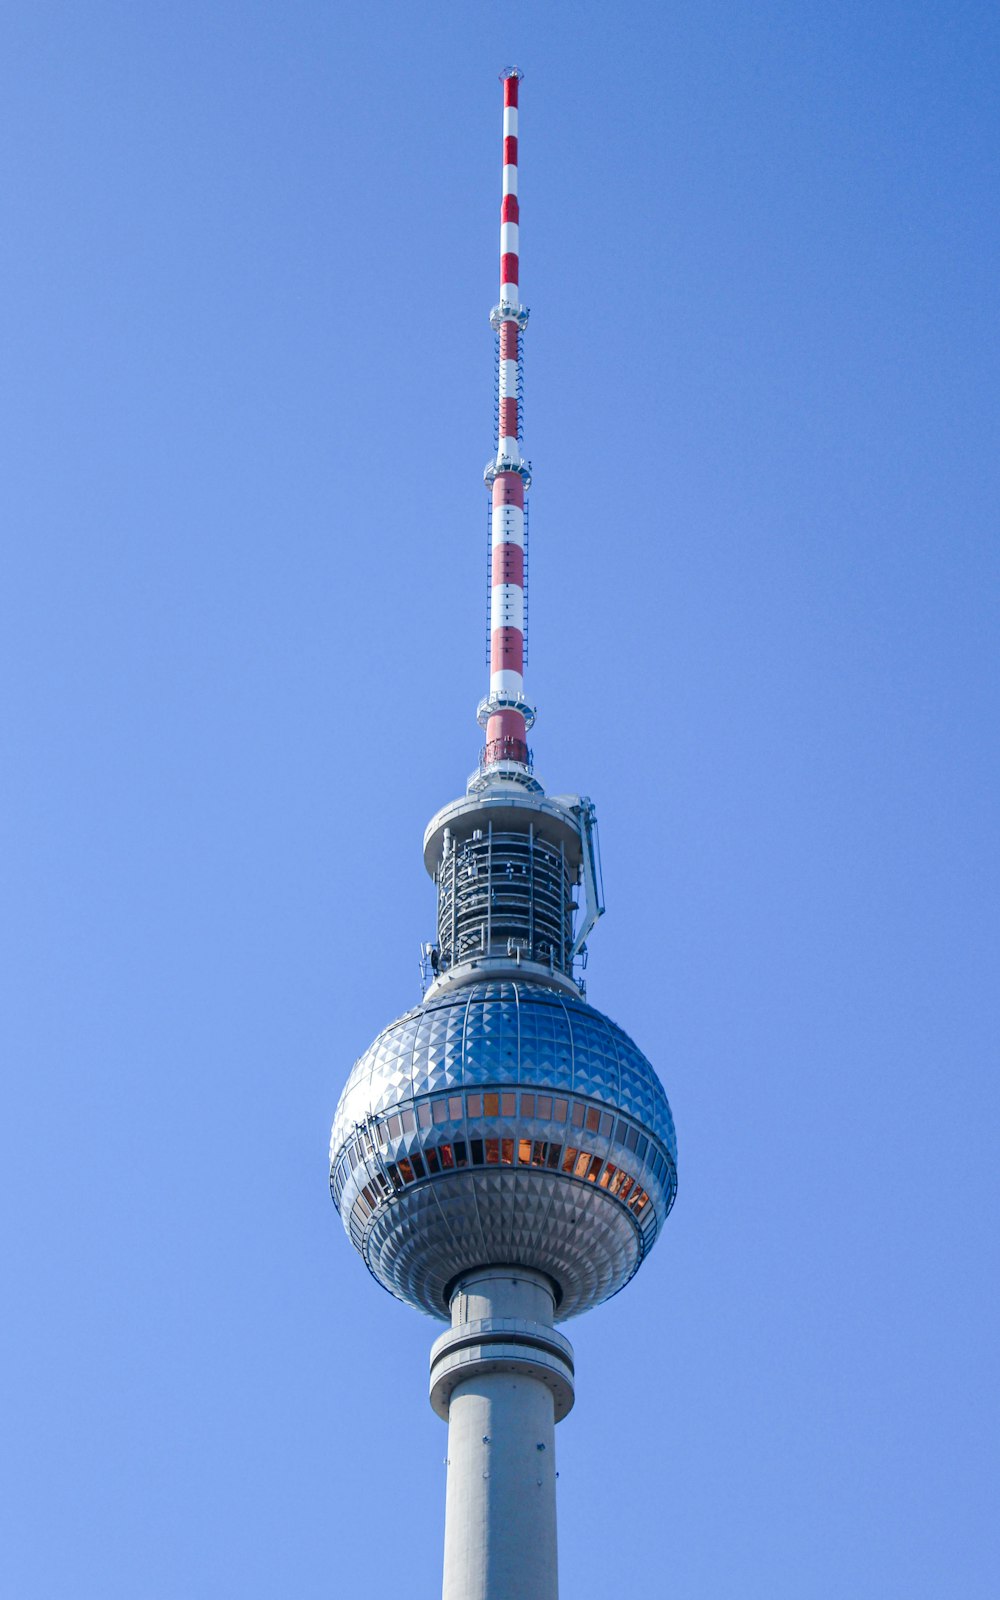 a tall tower with a red and white striped top